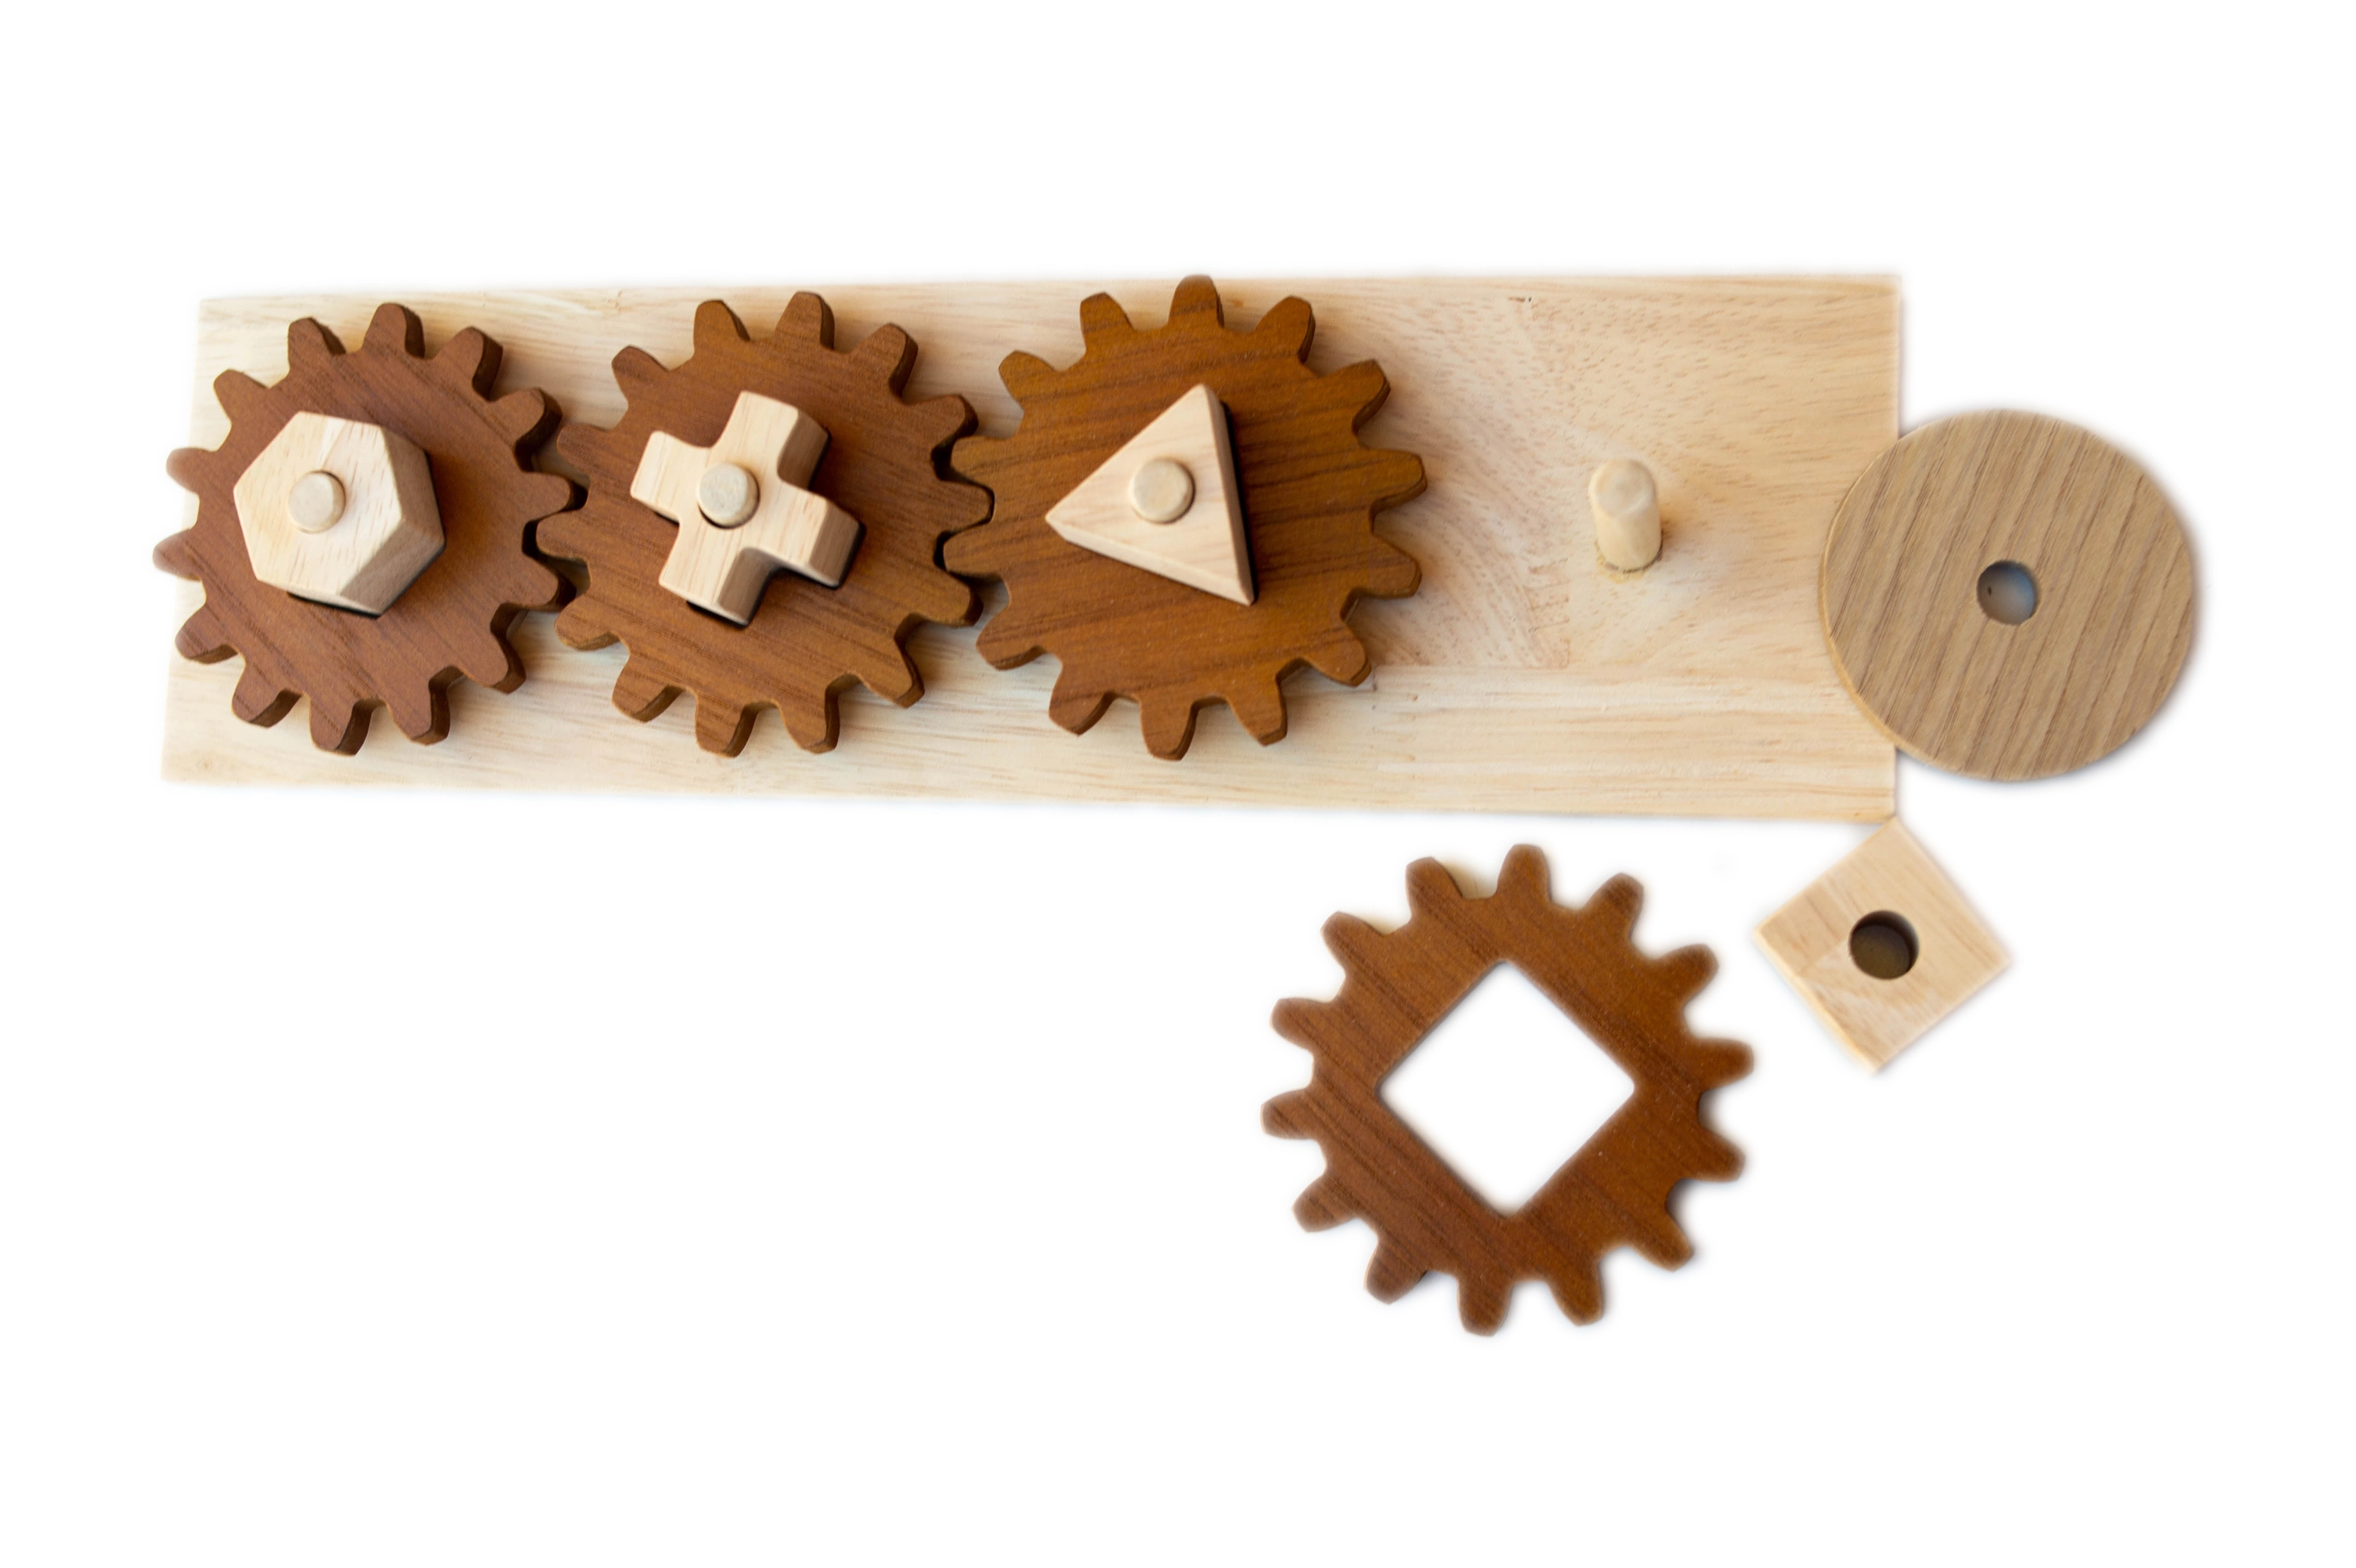 Wooden Gear Puzzle Toy